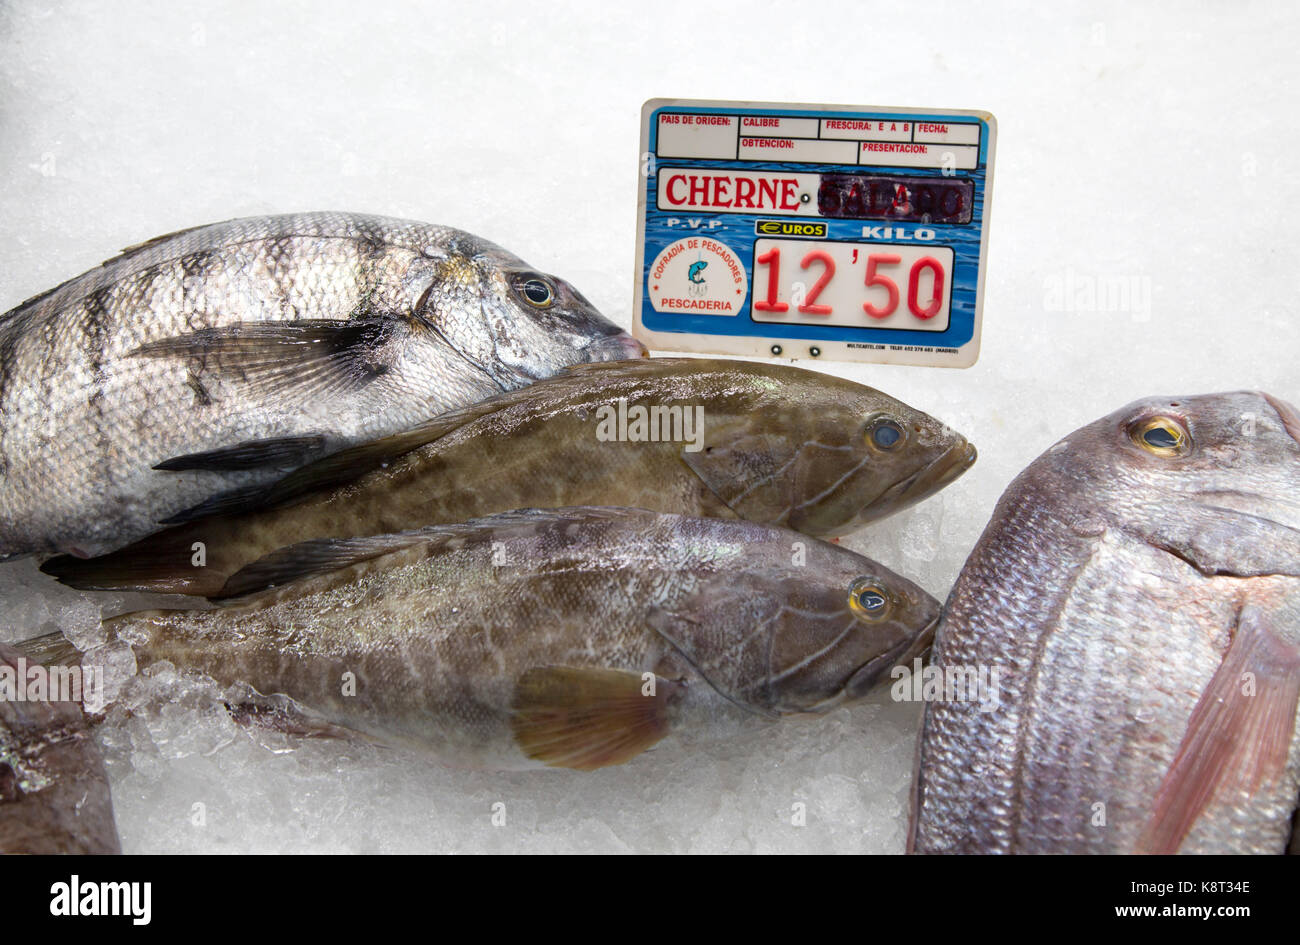 Wreckfish, also known as Stone Bass or Bass Grouper, fishmongers at Playa Blanca, Lanzarote, Canary Islands, Spain Stock Photo